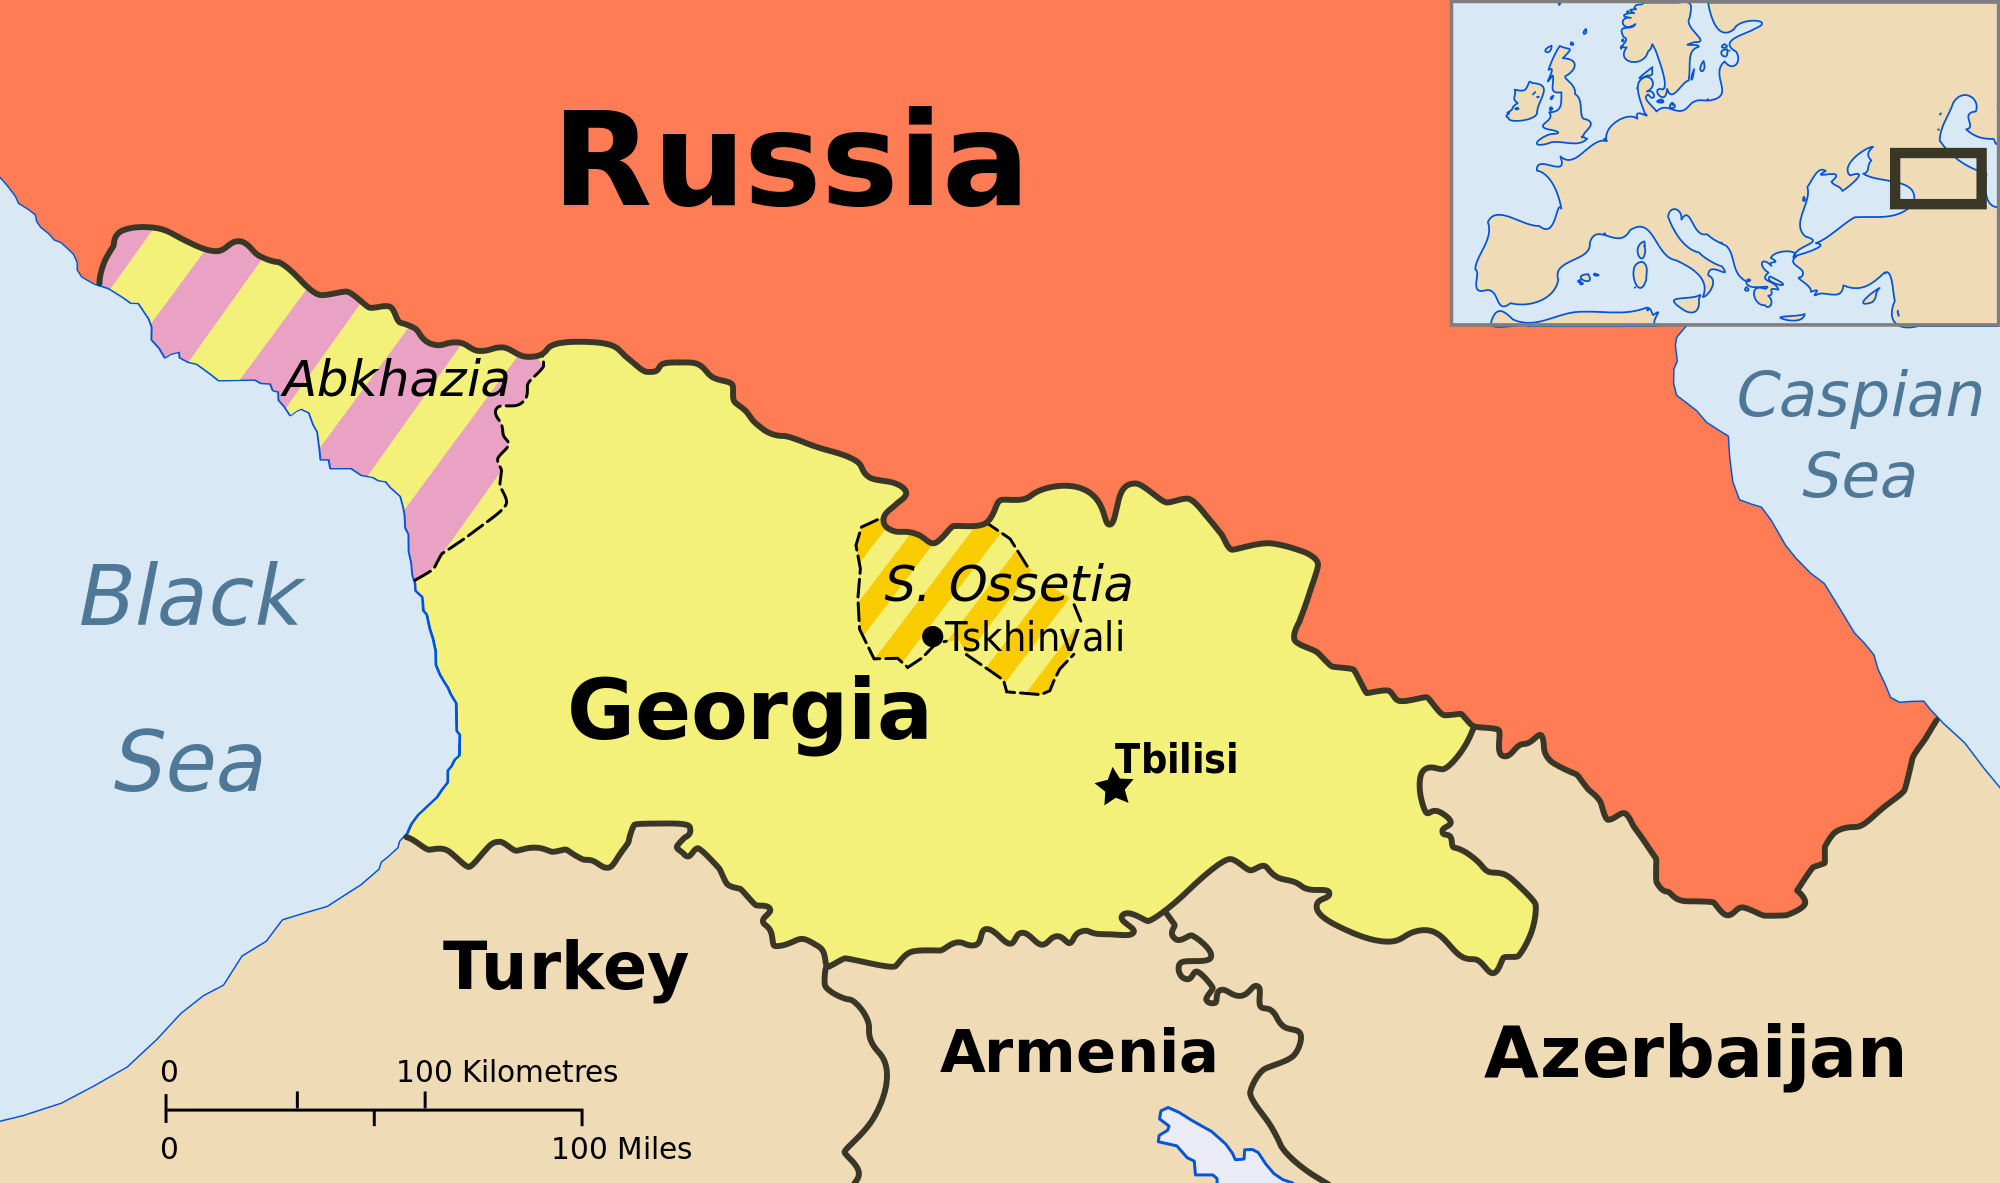 Russian and separatist militaries currently occupy the regions of South Ossetia and Abkhazia